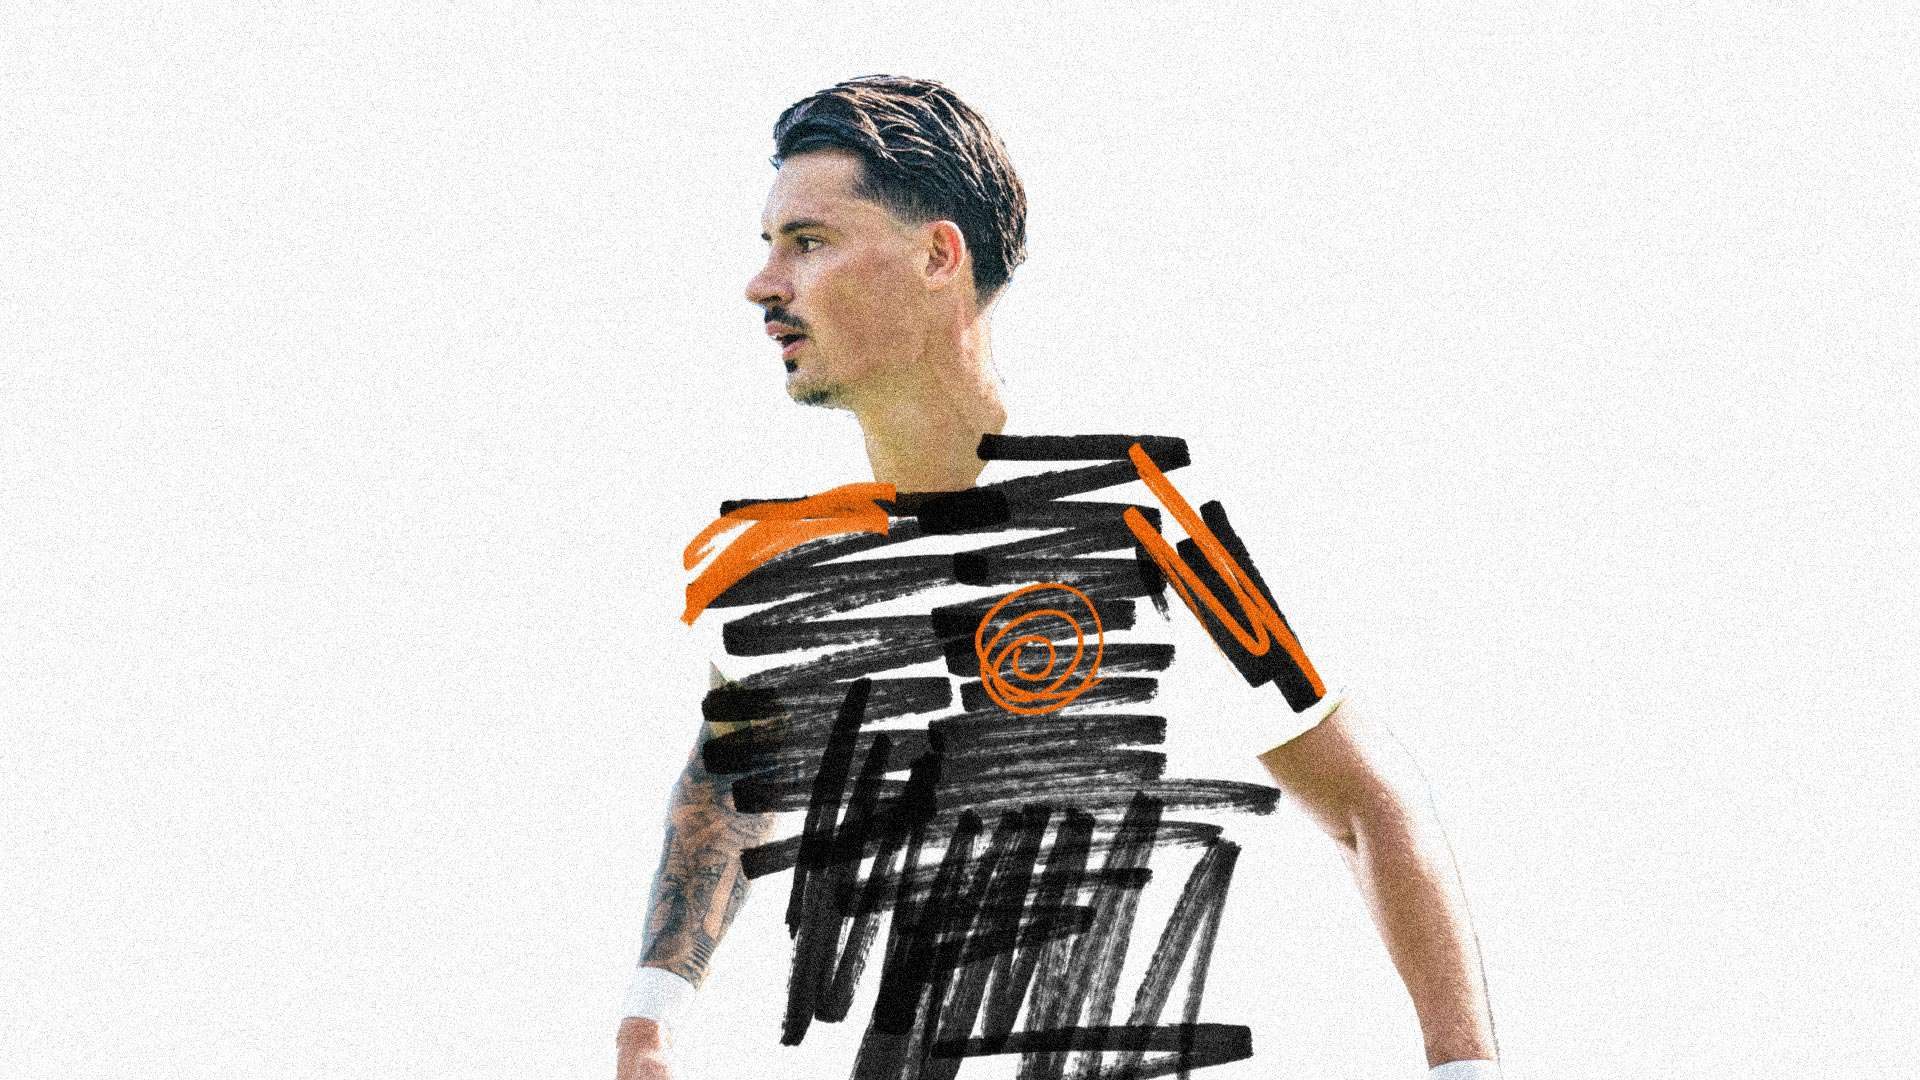 An image of Robin Koch with black and orange scribbles over the Leeds kit, like Radz' son's design for the third kit that got sent to Adidas